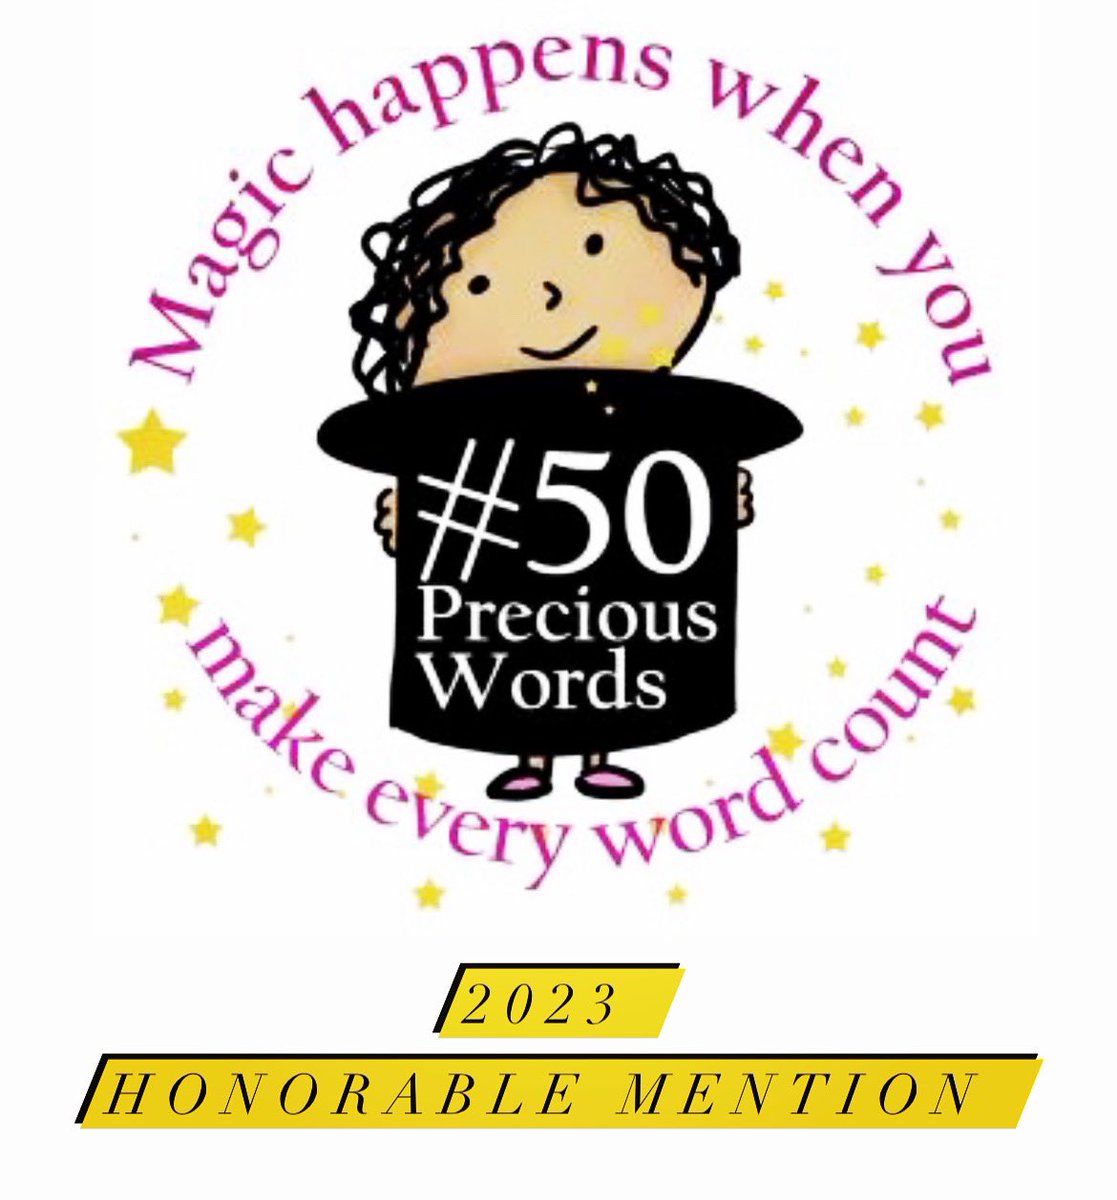 So excited to learn I was an Honorable Mention in this year’s #50PreciousWords contest! I did 50 (oh so short!) rhyming nonfiction  words about crabs 🦀 #kidlit #amwriting #nonfiction #nfpb